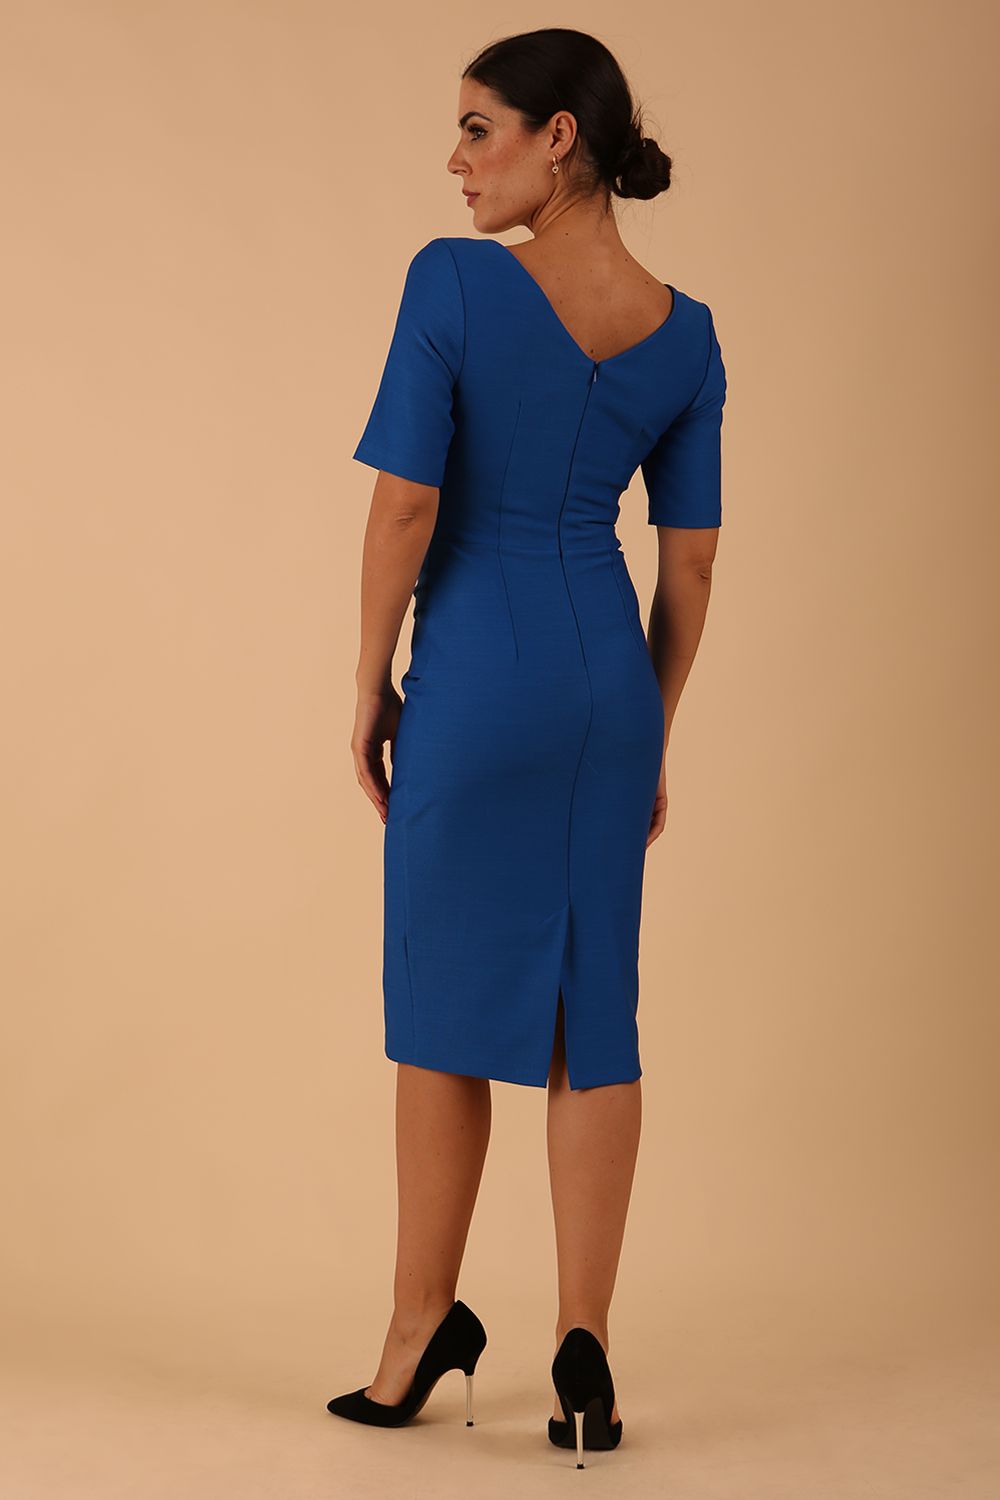 model wearing diva catwalk couture wiltshire fitted pencil-skirt dress with short sleeves and open v-neckline and pleating across the tummy area in sapphire blue colour back